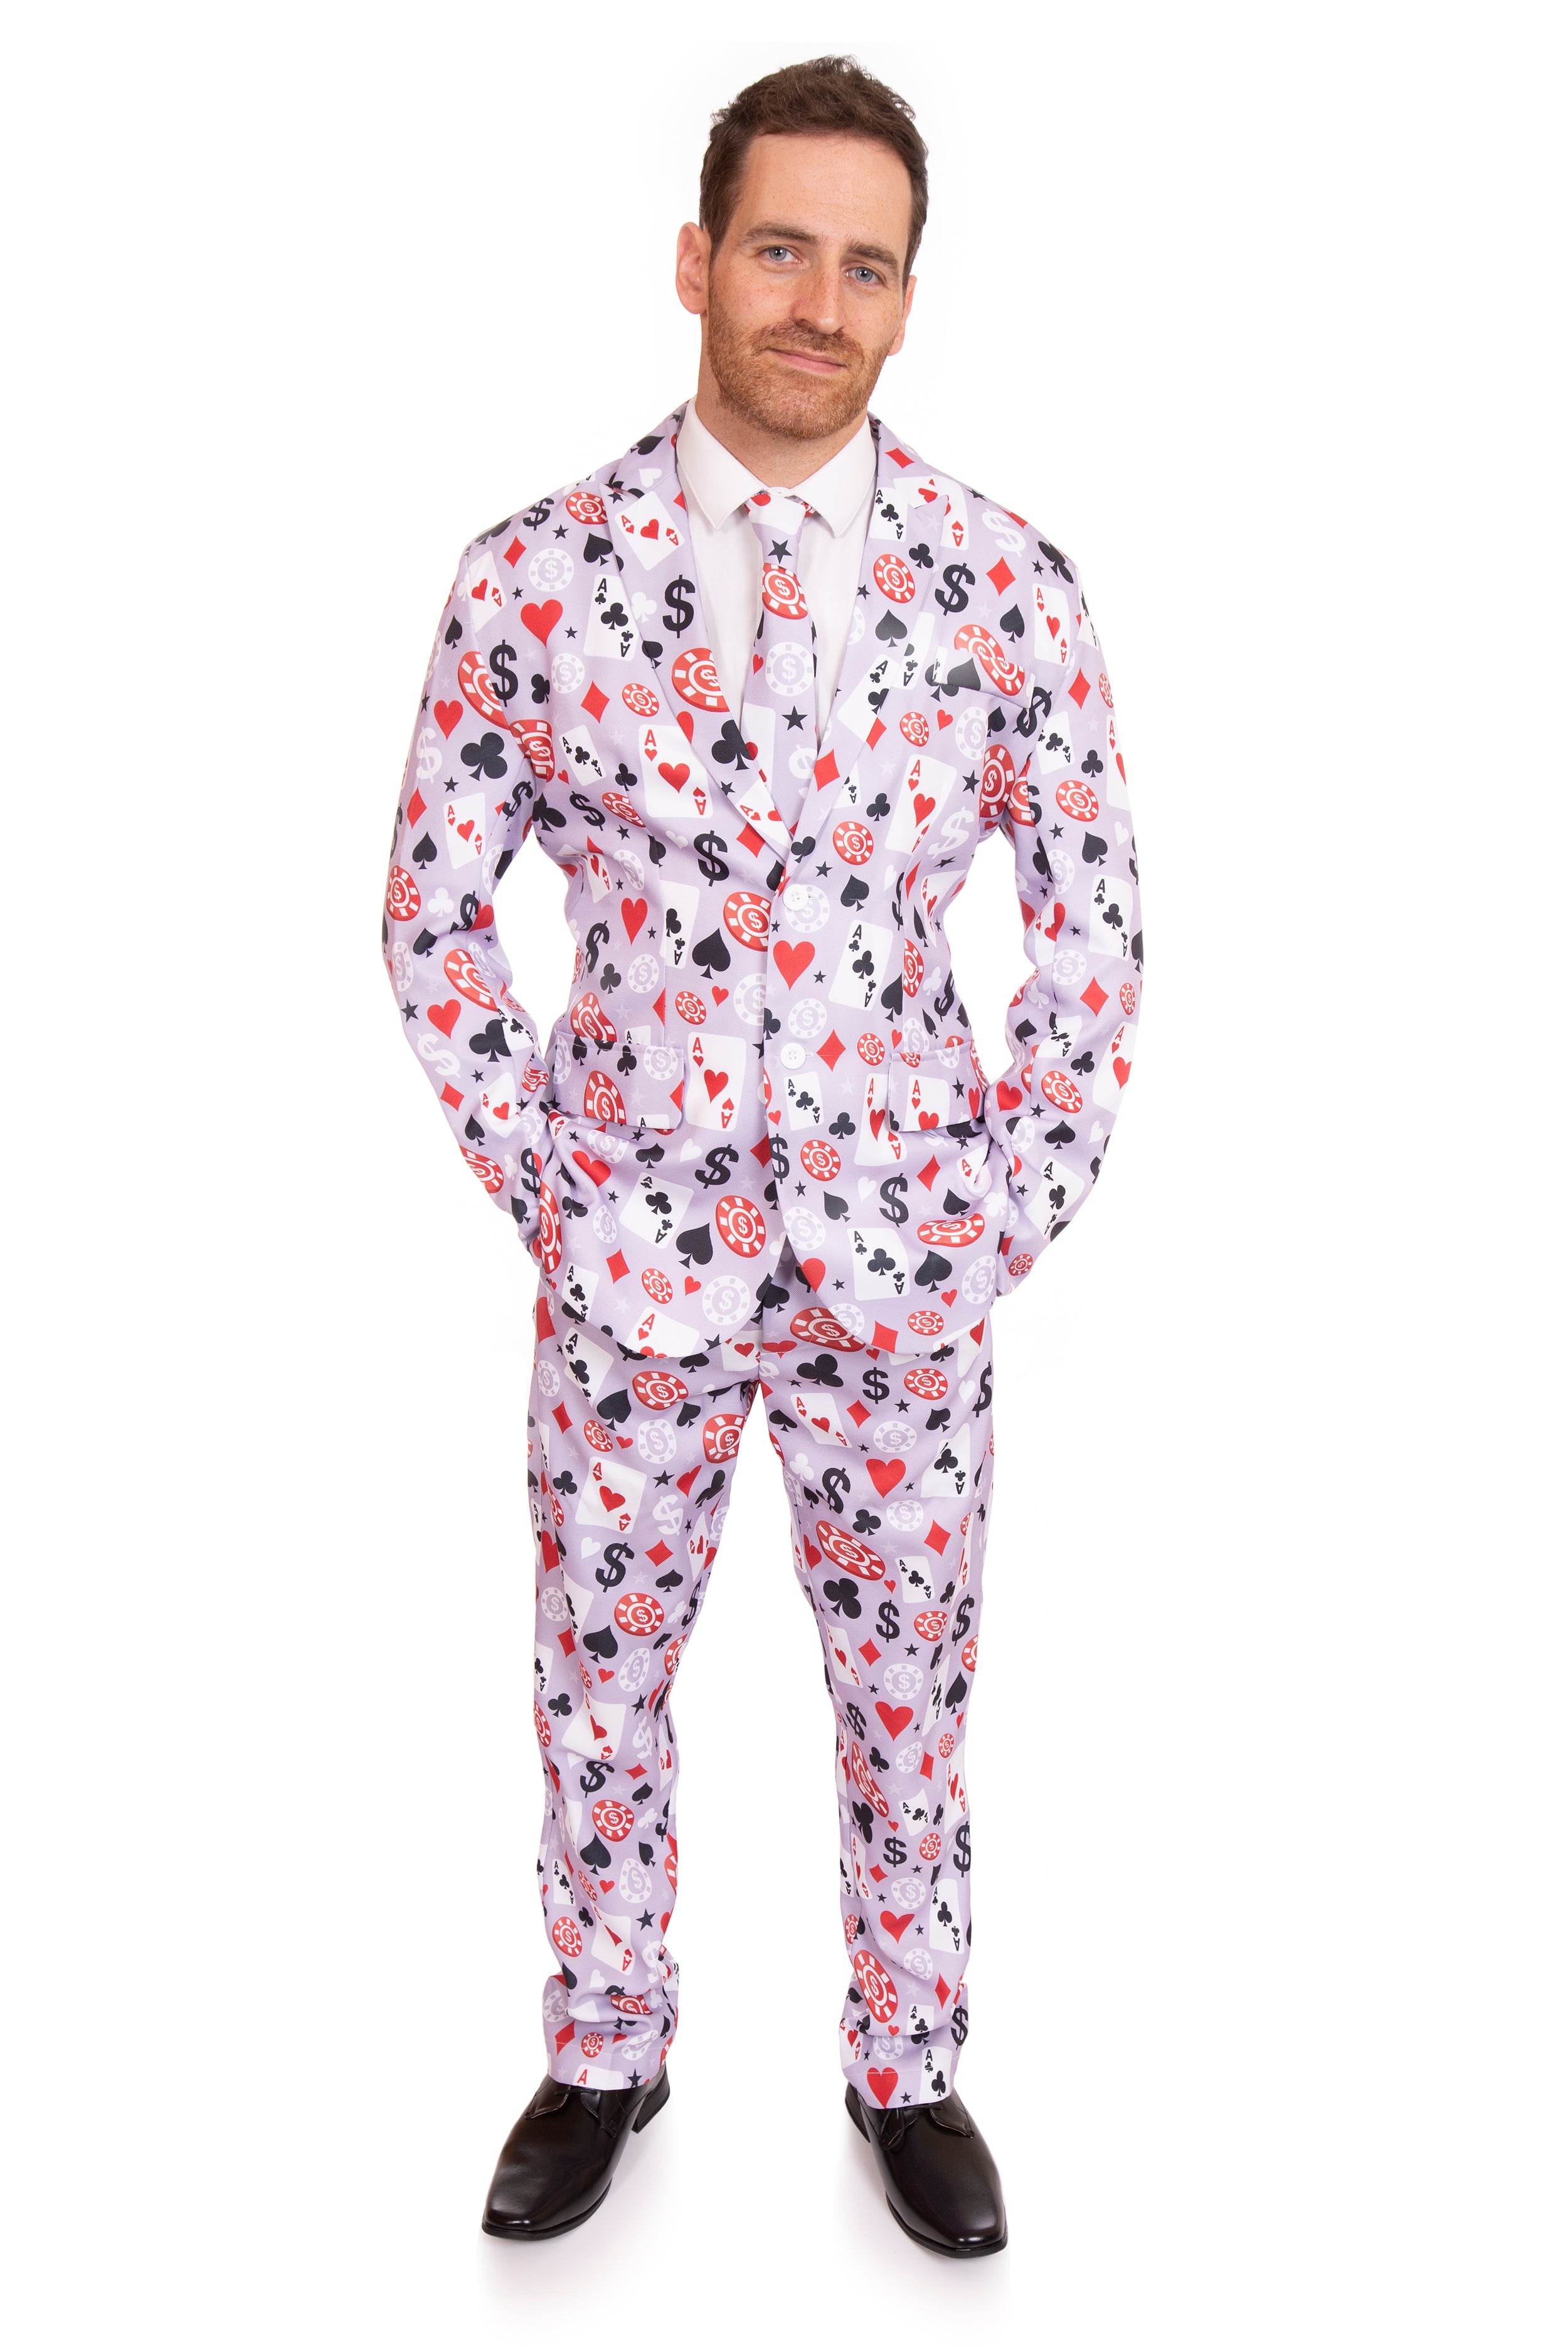 High Roller Poker Stag Suit – Stag Suits